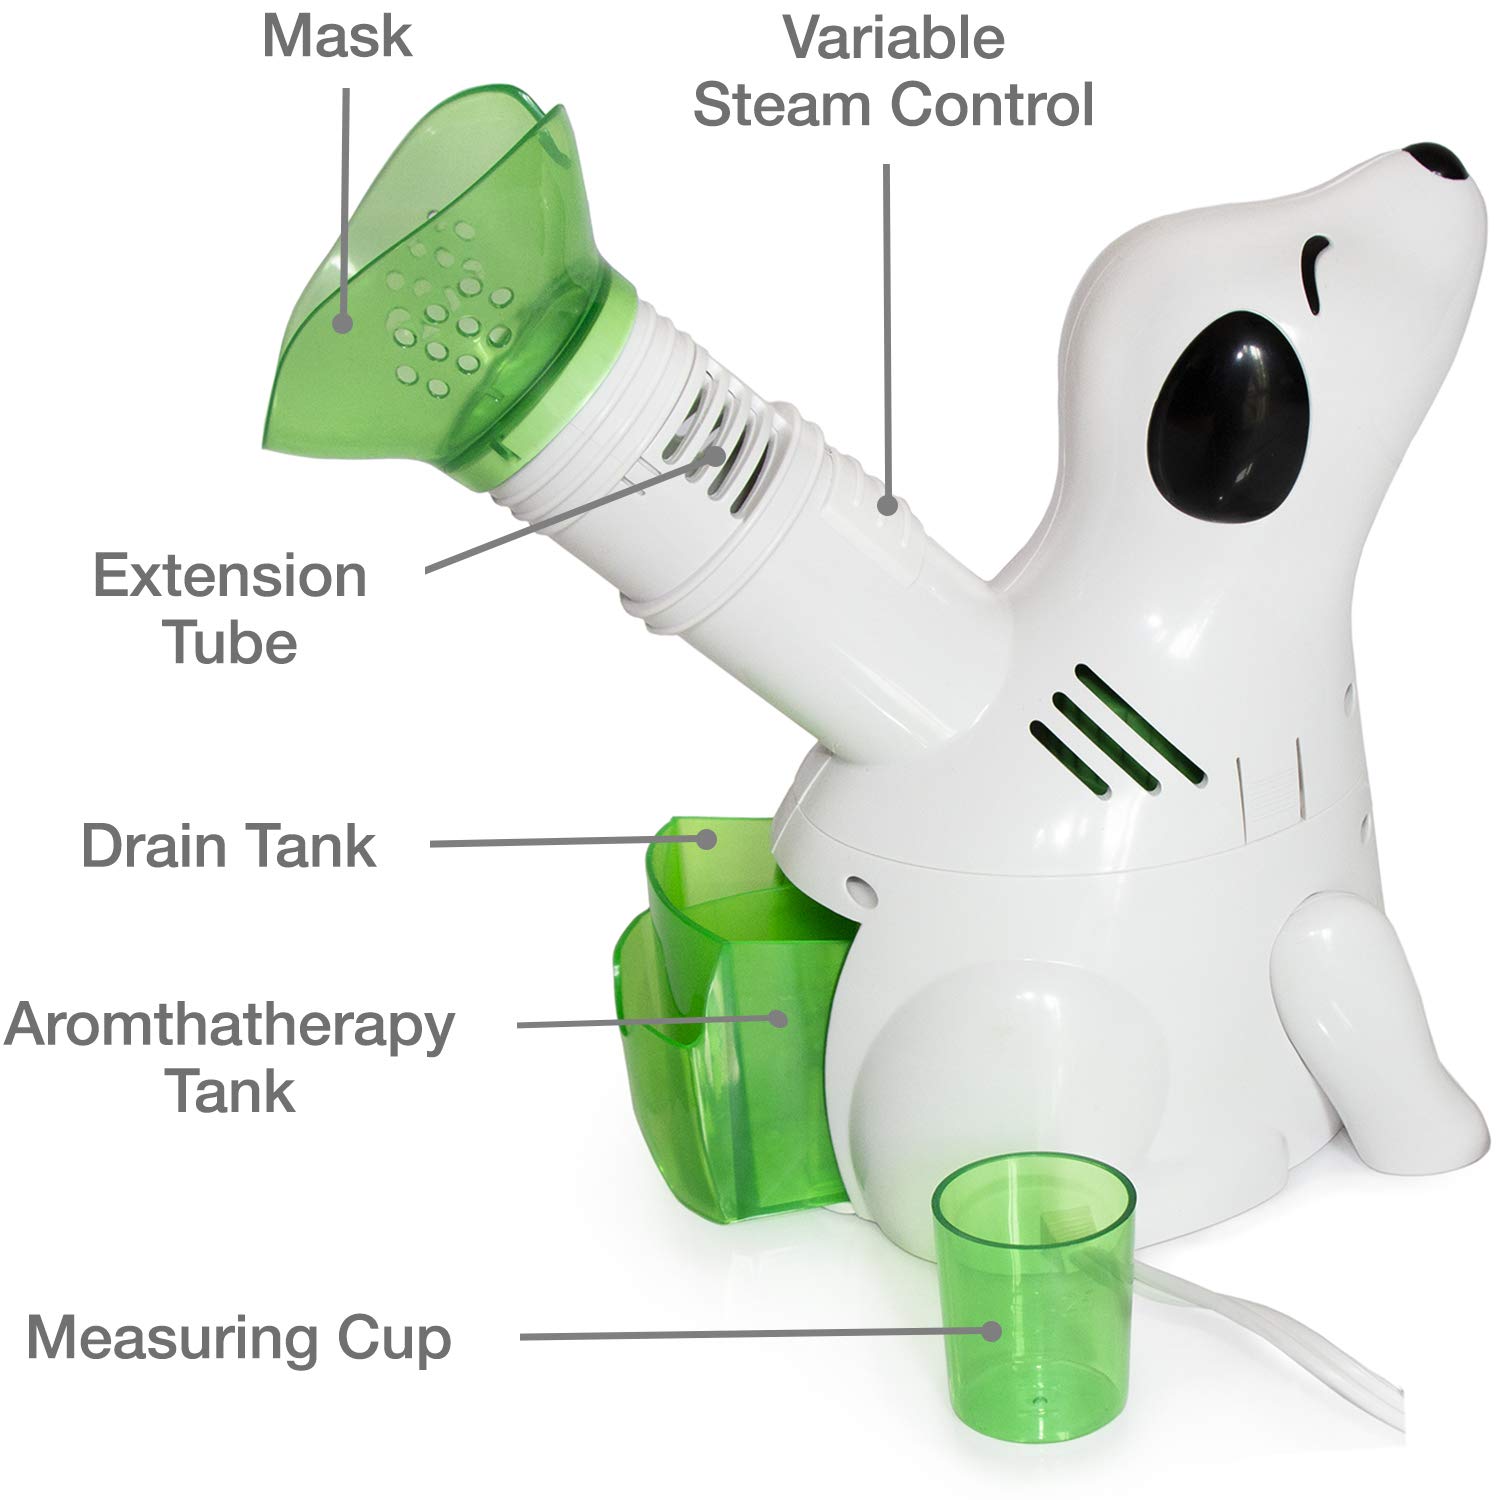 HealthSmart Humidifier and Personal Steam Inhaler for Kids Includes an Aromatherapy Tank and Facial Mask that Offers a Quick 6-9 Minute Therapy with Variable Steam Adjustment, Digger Dog